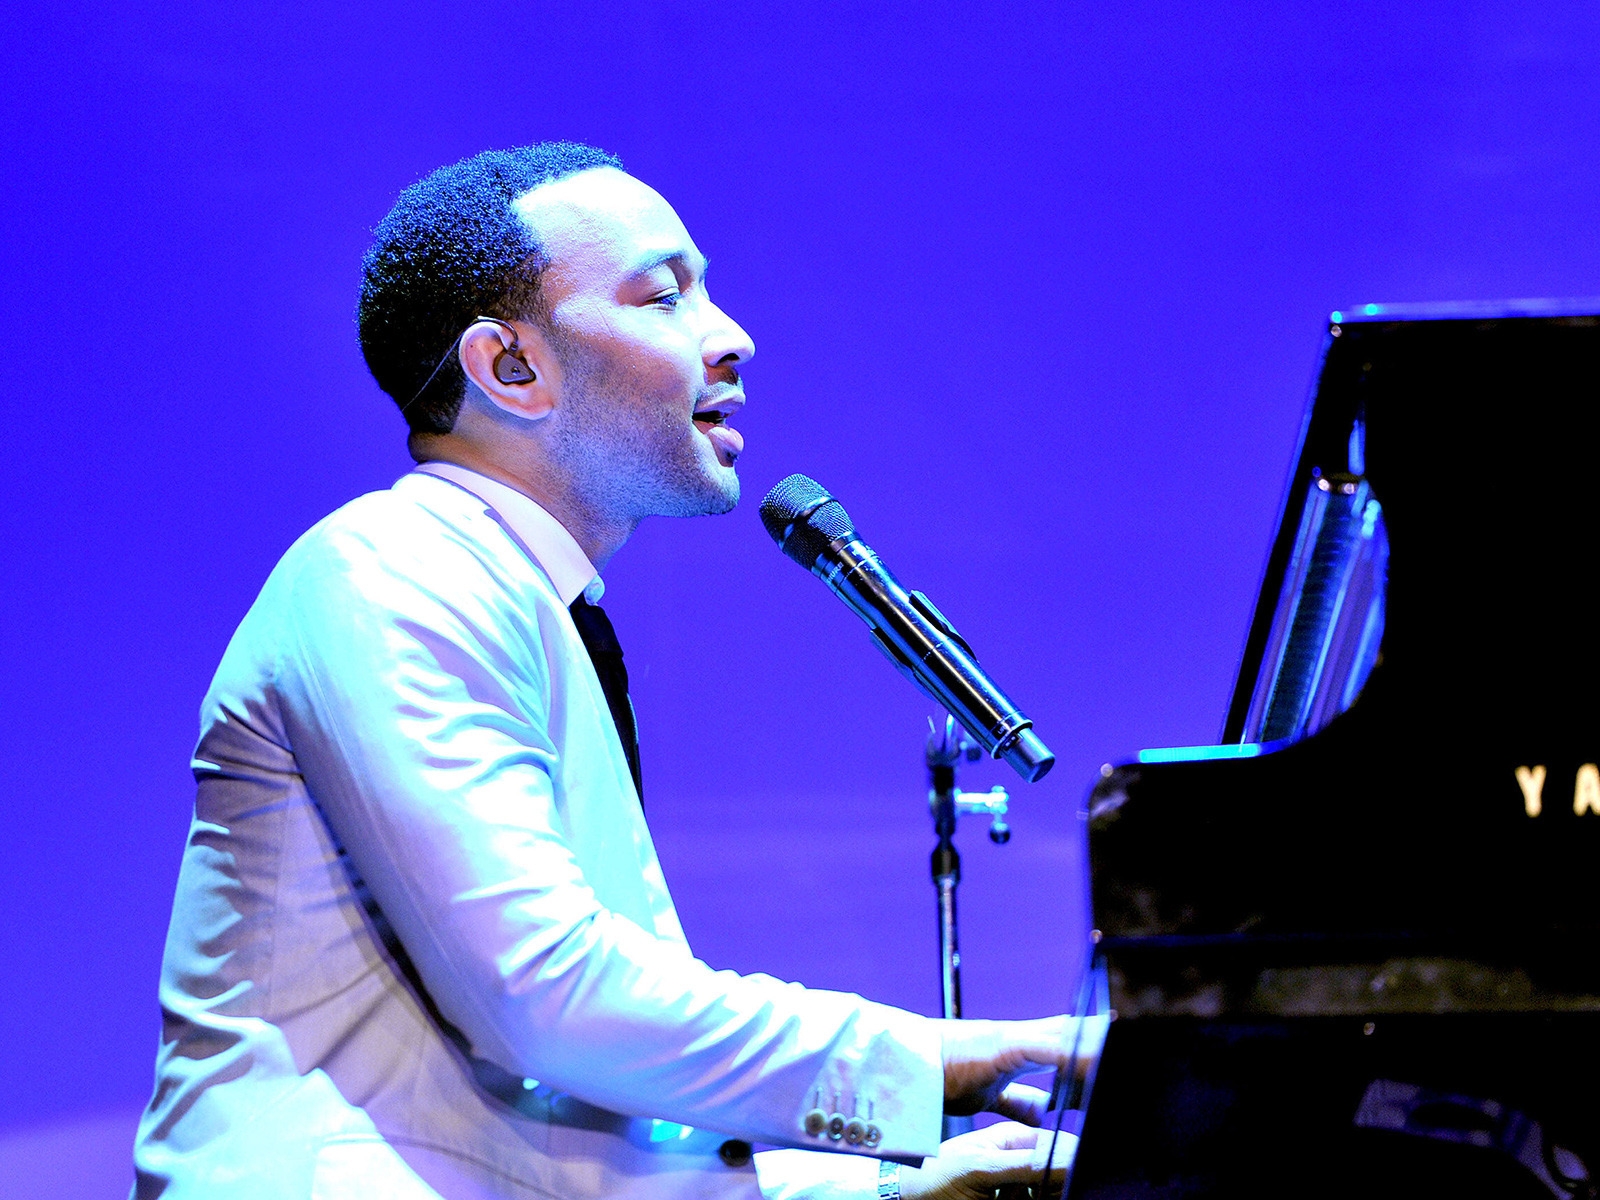 John Legend at Piano for 1600 x 1200 resolution